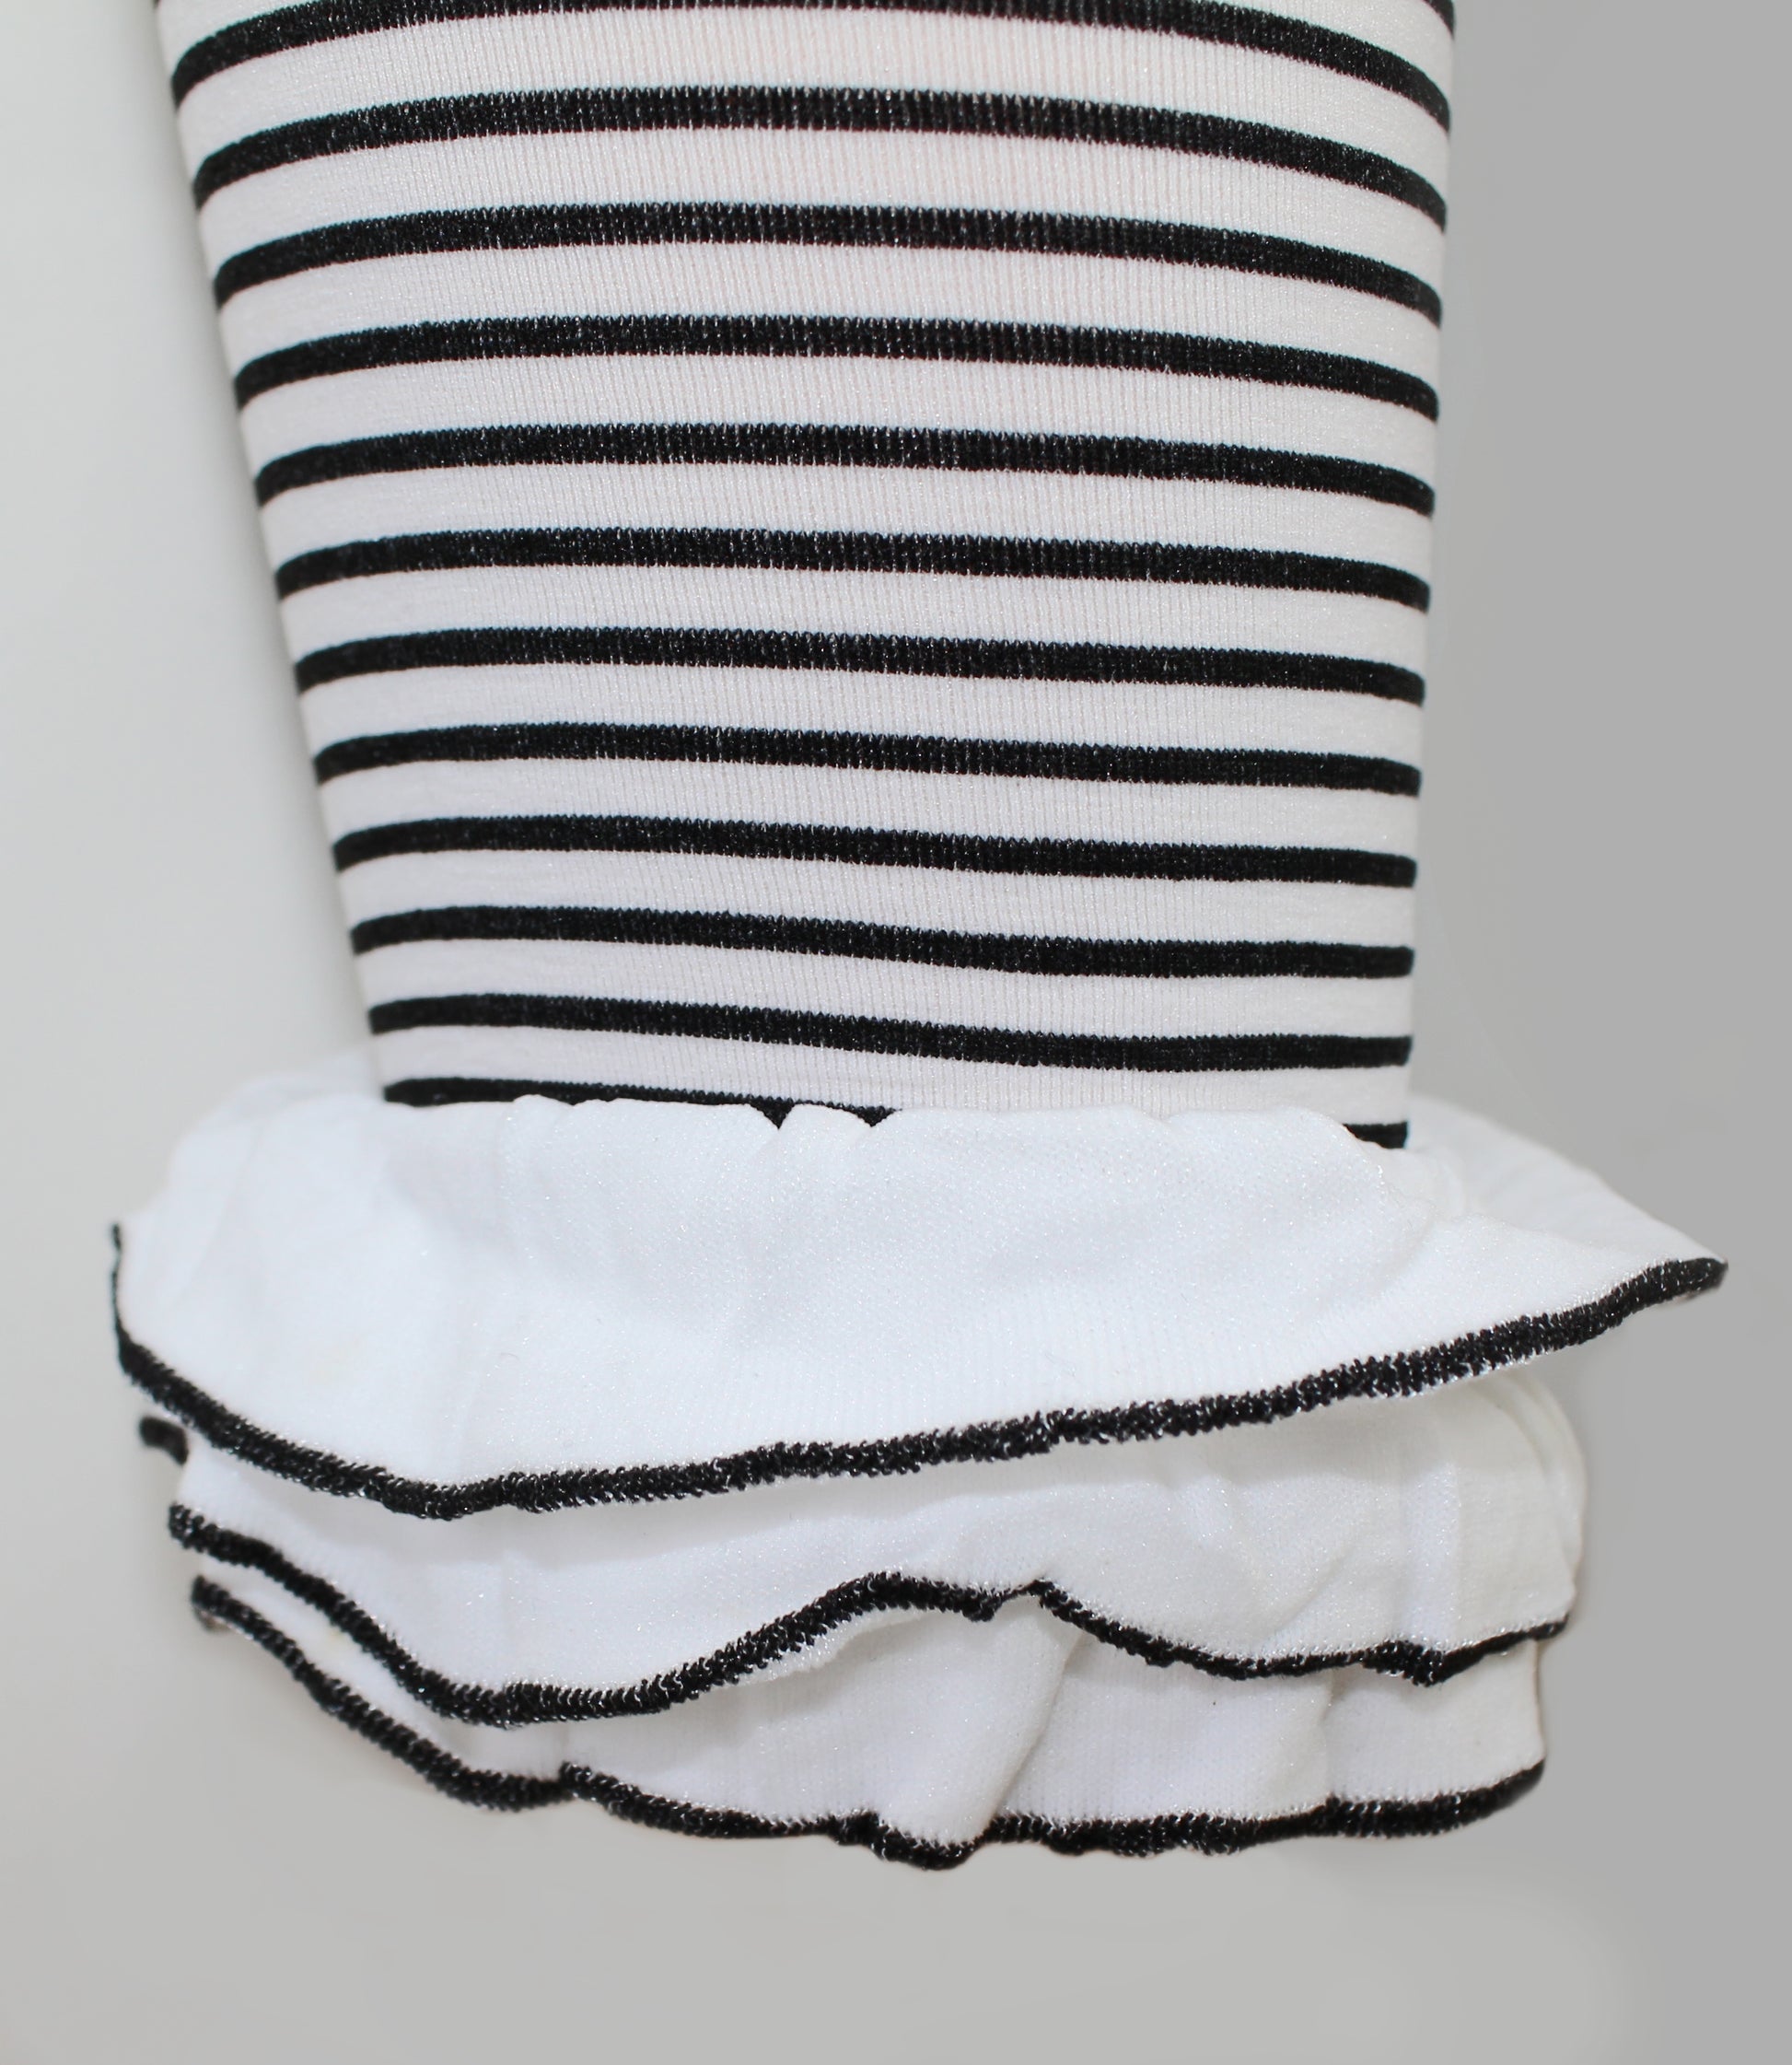 Omsa St. Tropez Pantacollant - Soft white opaque kid's footless tights with a black horizontal stripe pattern and frilly ruched cuff.